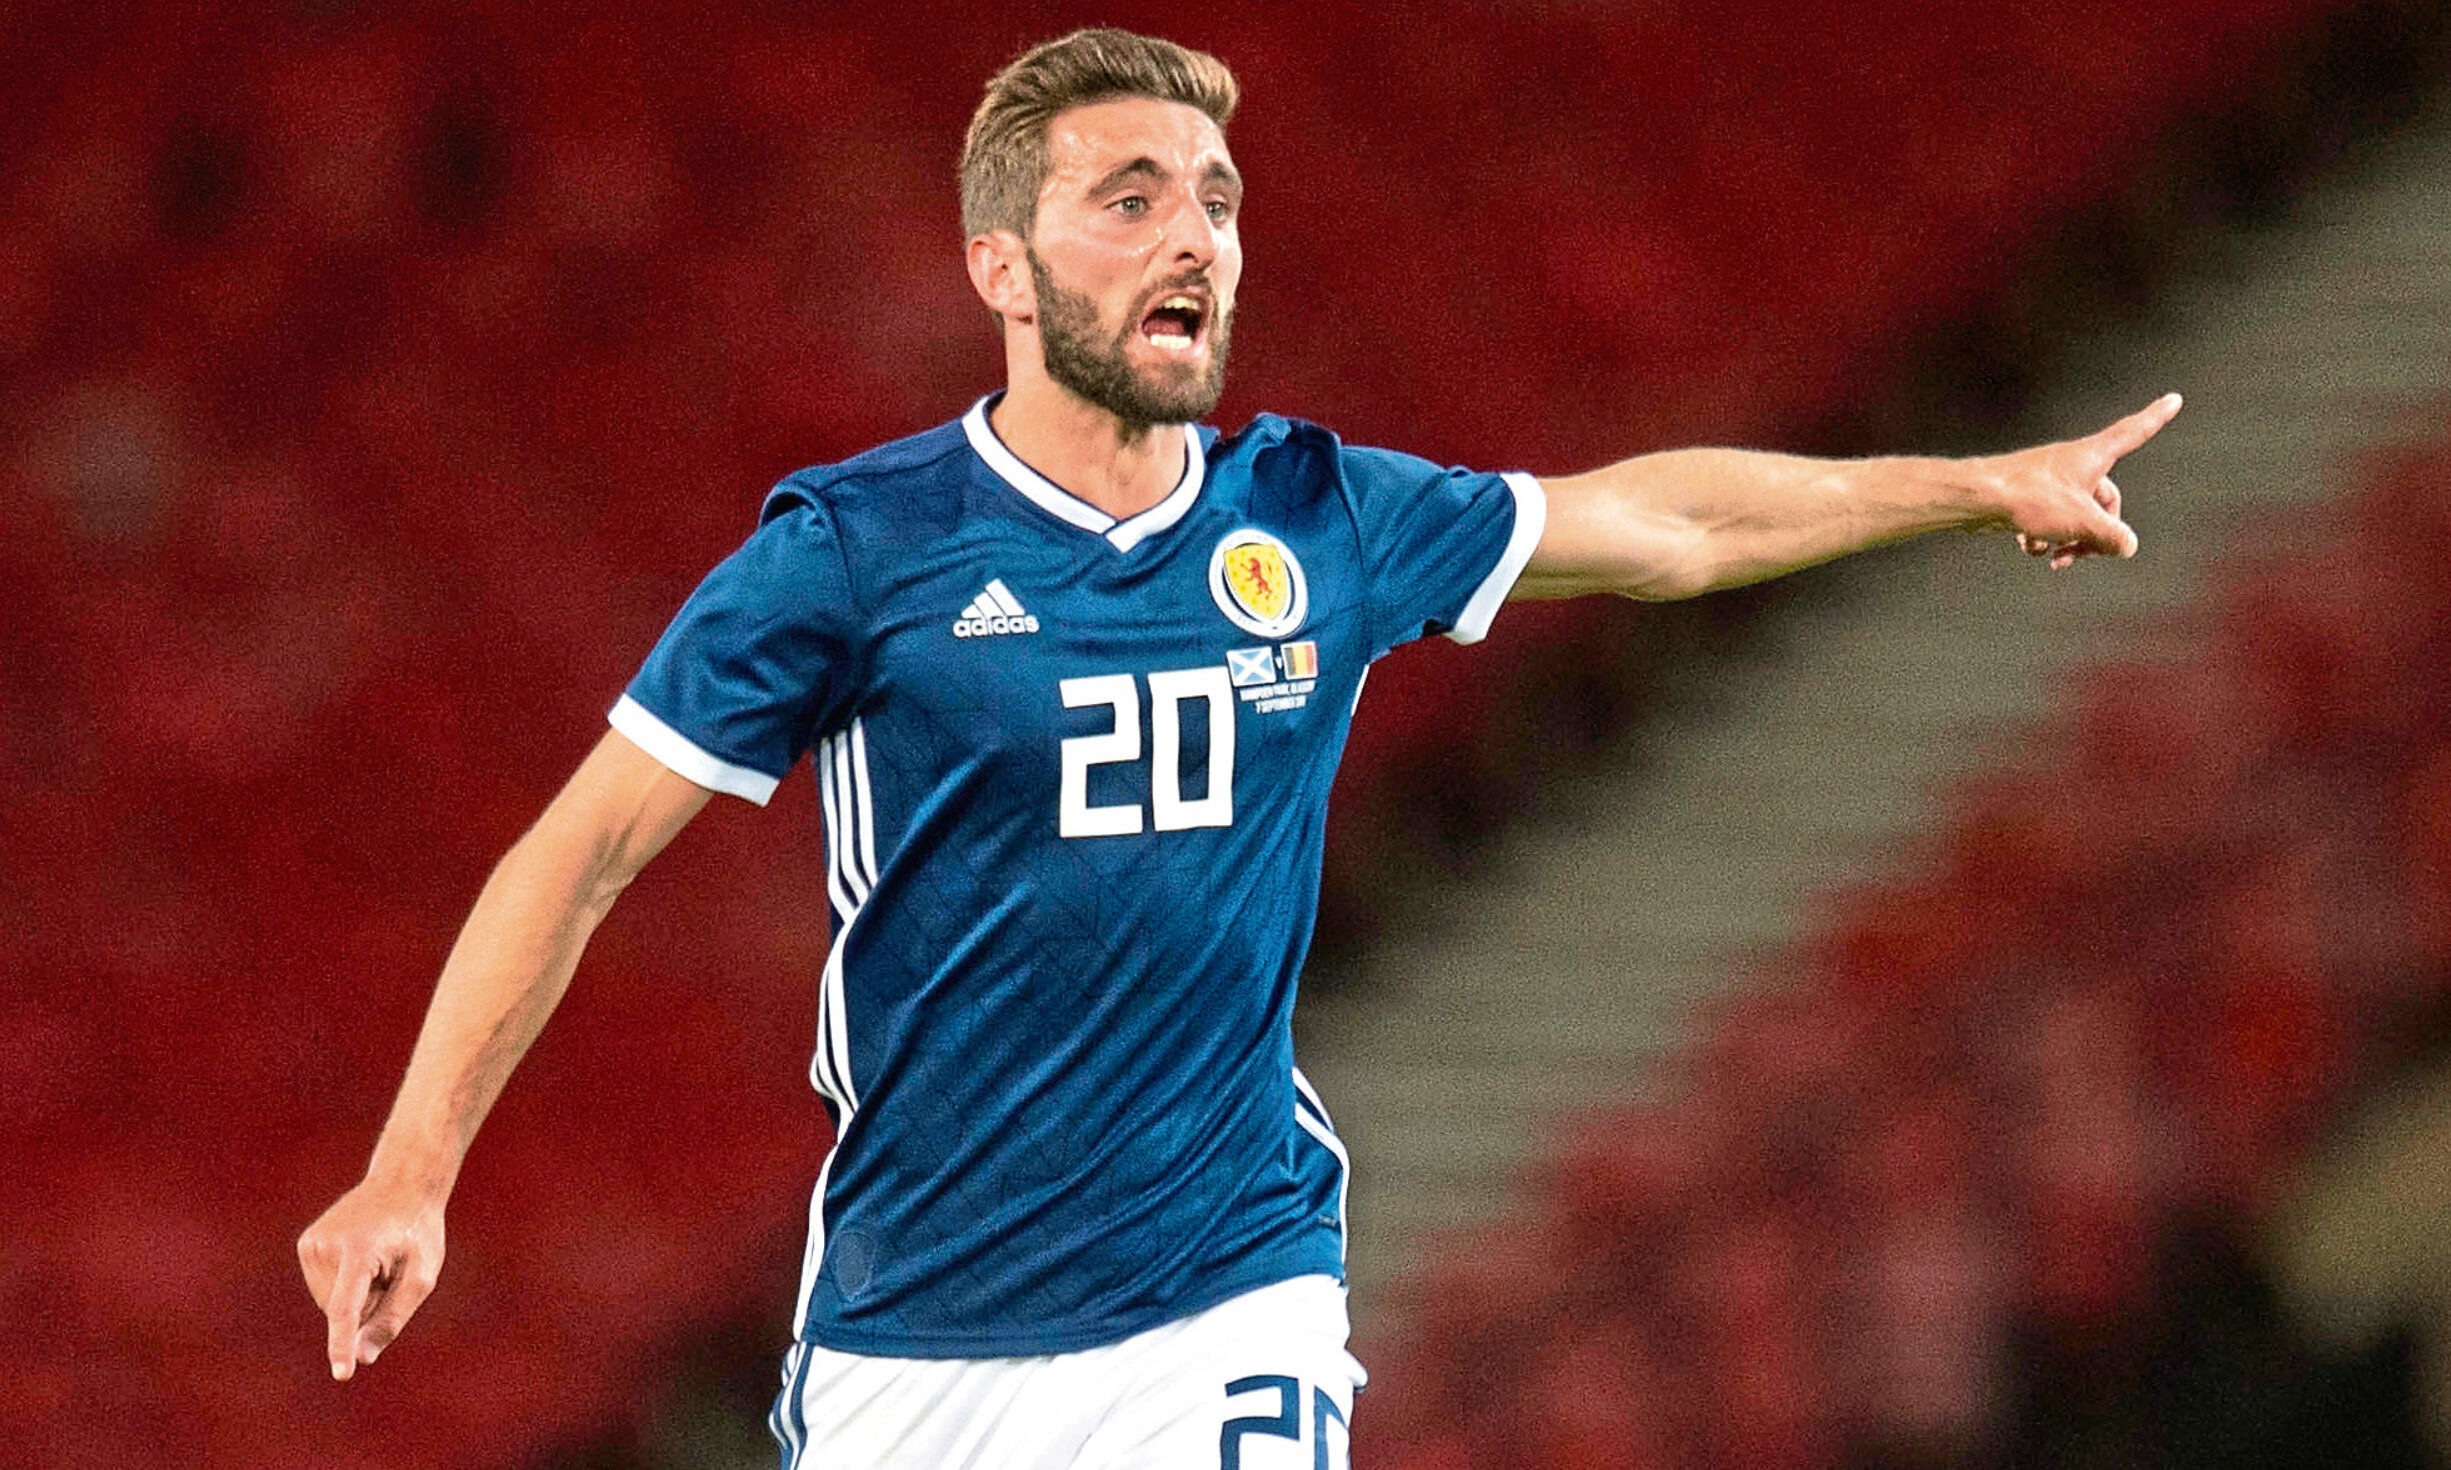 The Scotland international has made the move to Wigan Athletic.